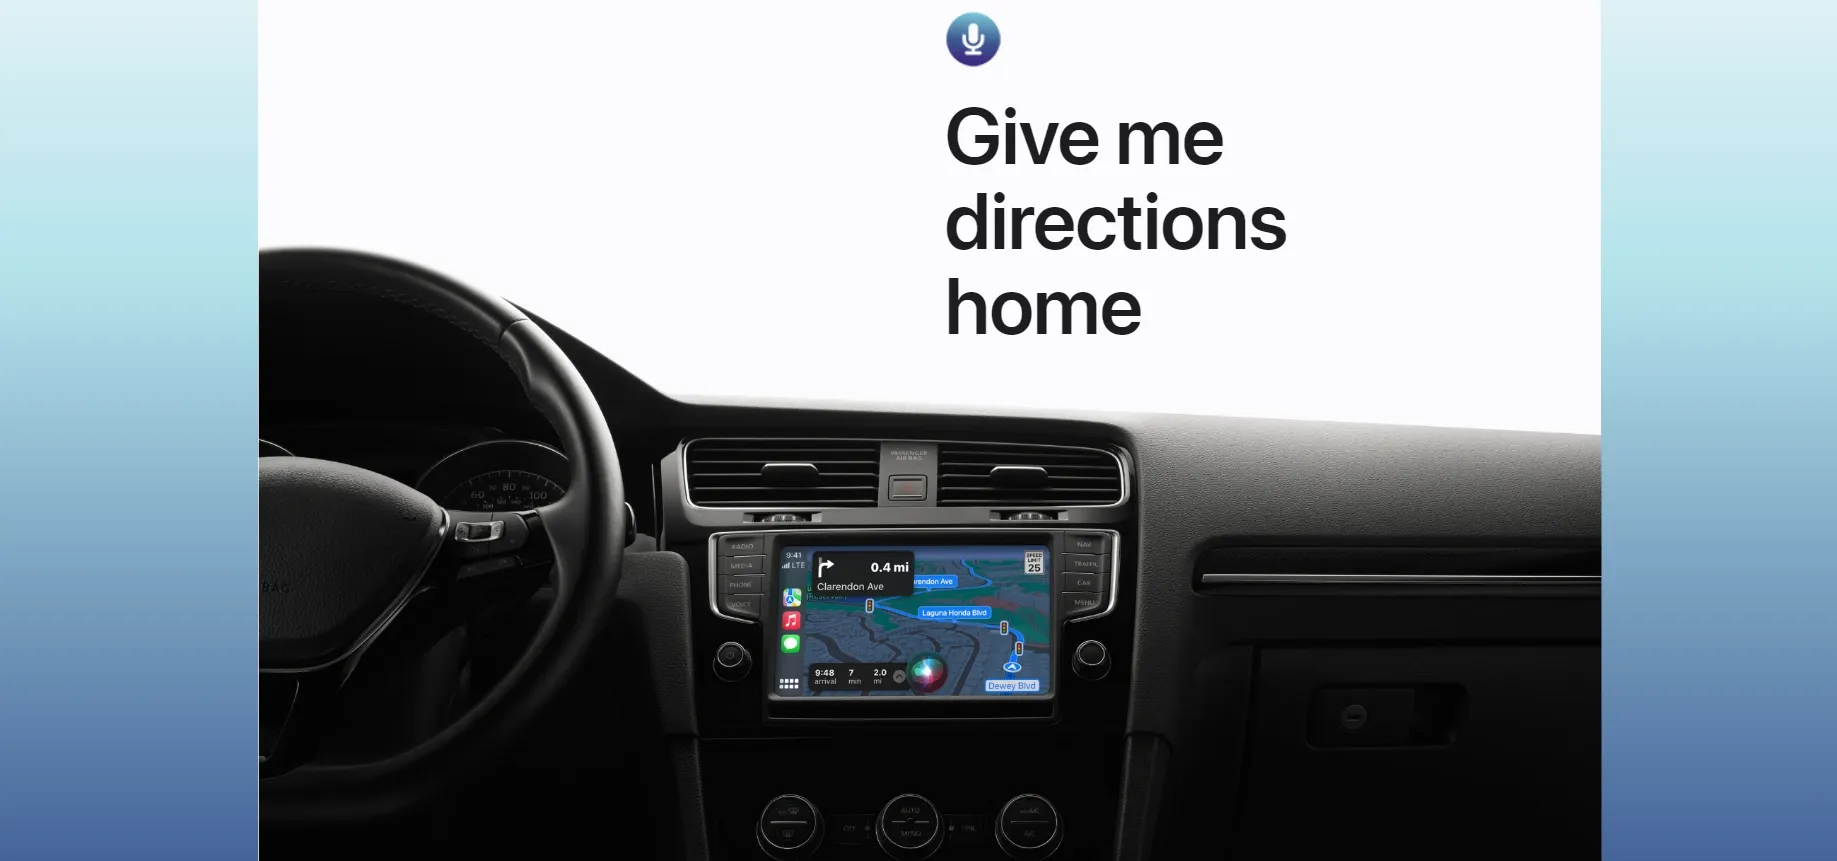 Siri commands for navigation and traveling